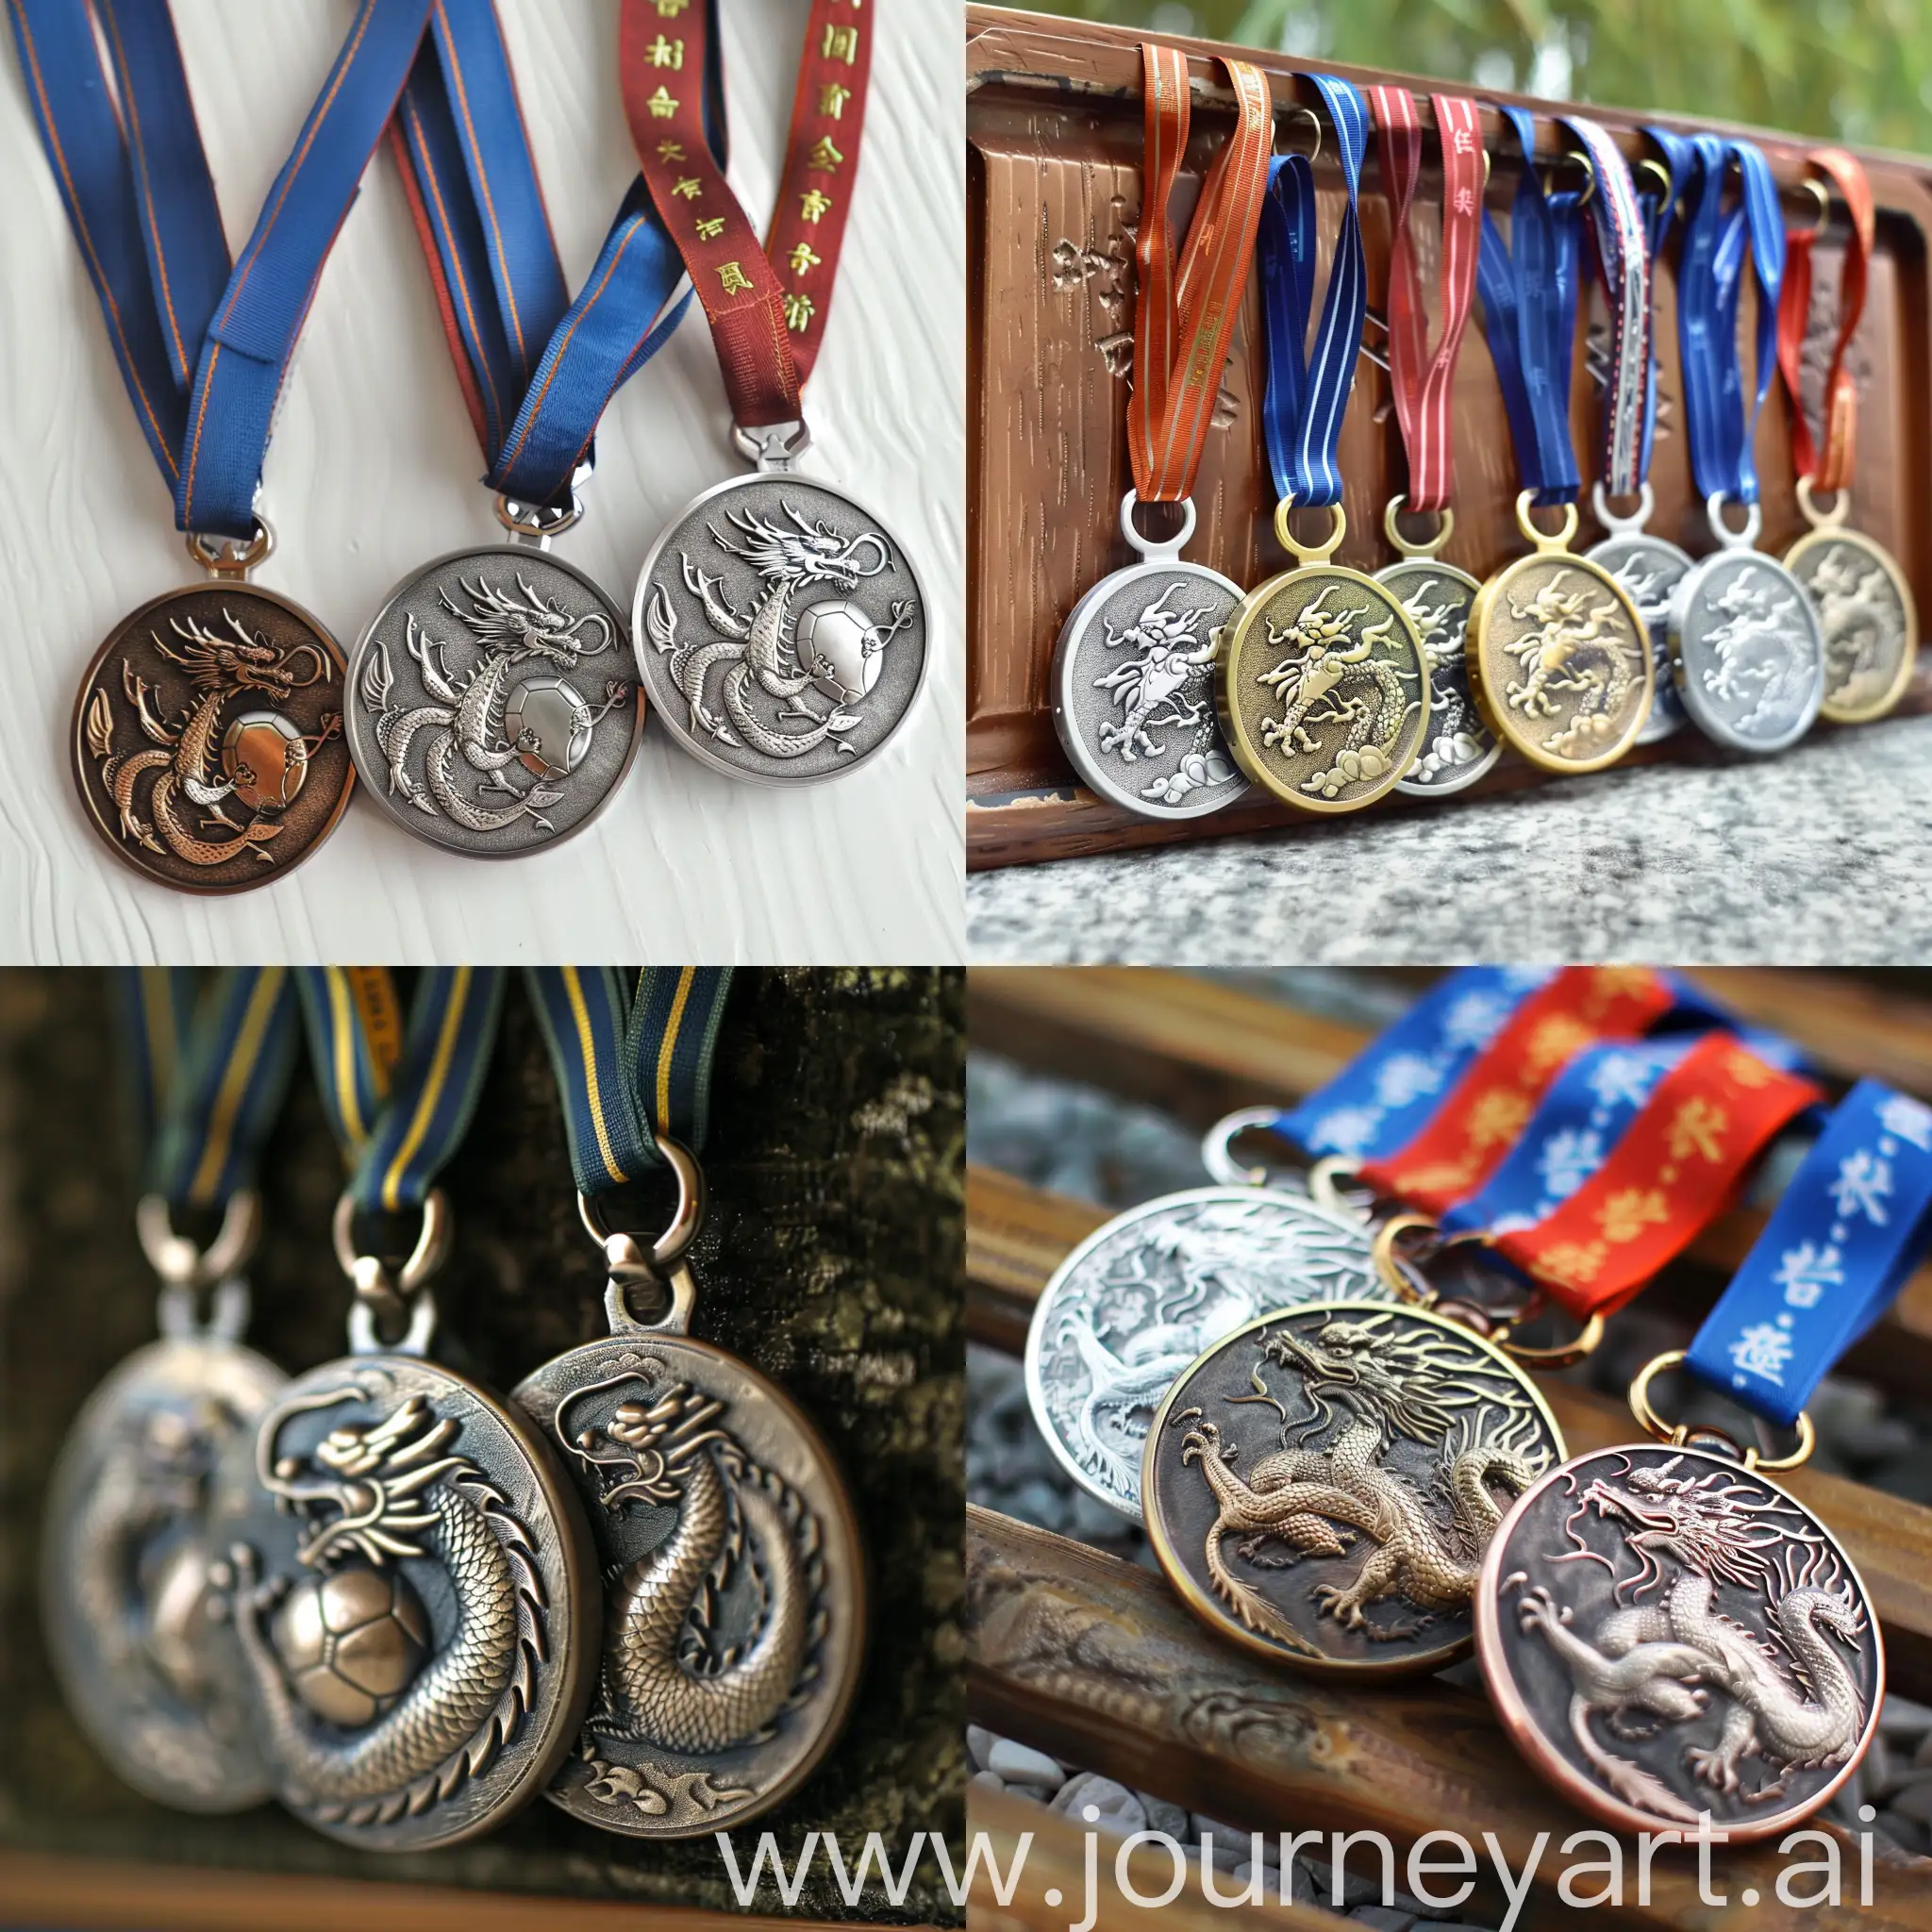 Football medals, Chinese dragons